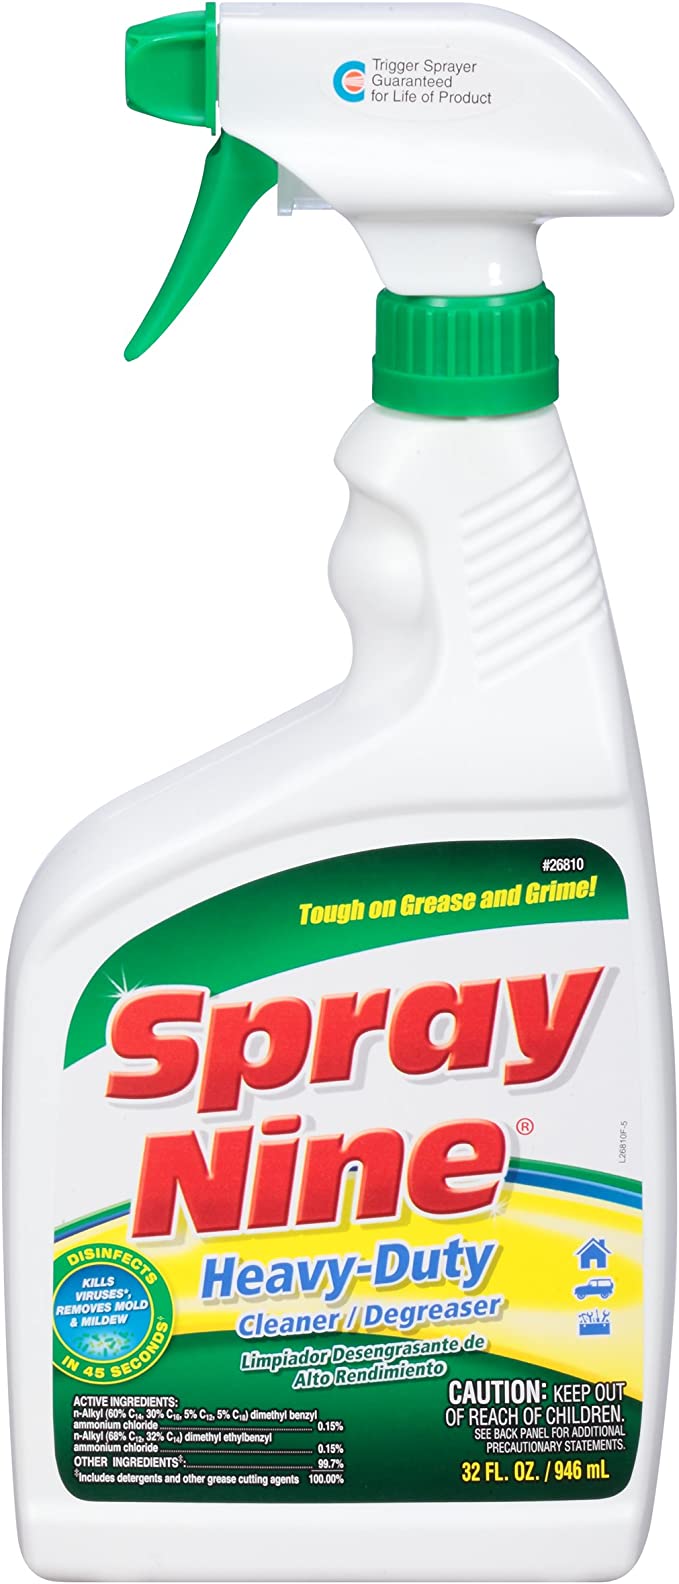 Spray Nine, 26810 Heavy Duty Cleaner/Degreaser and Disinfectant (32 Fl. Oz.)